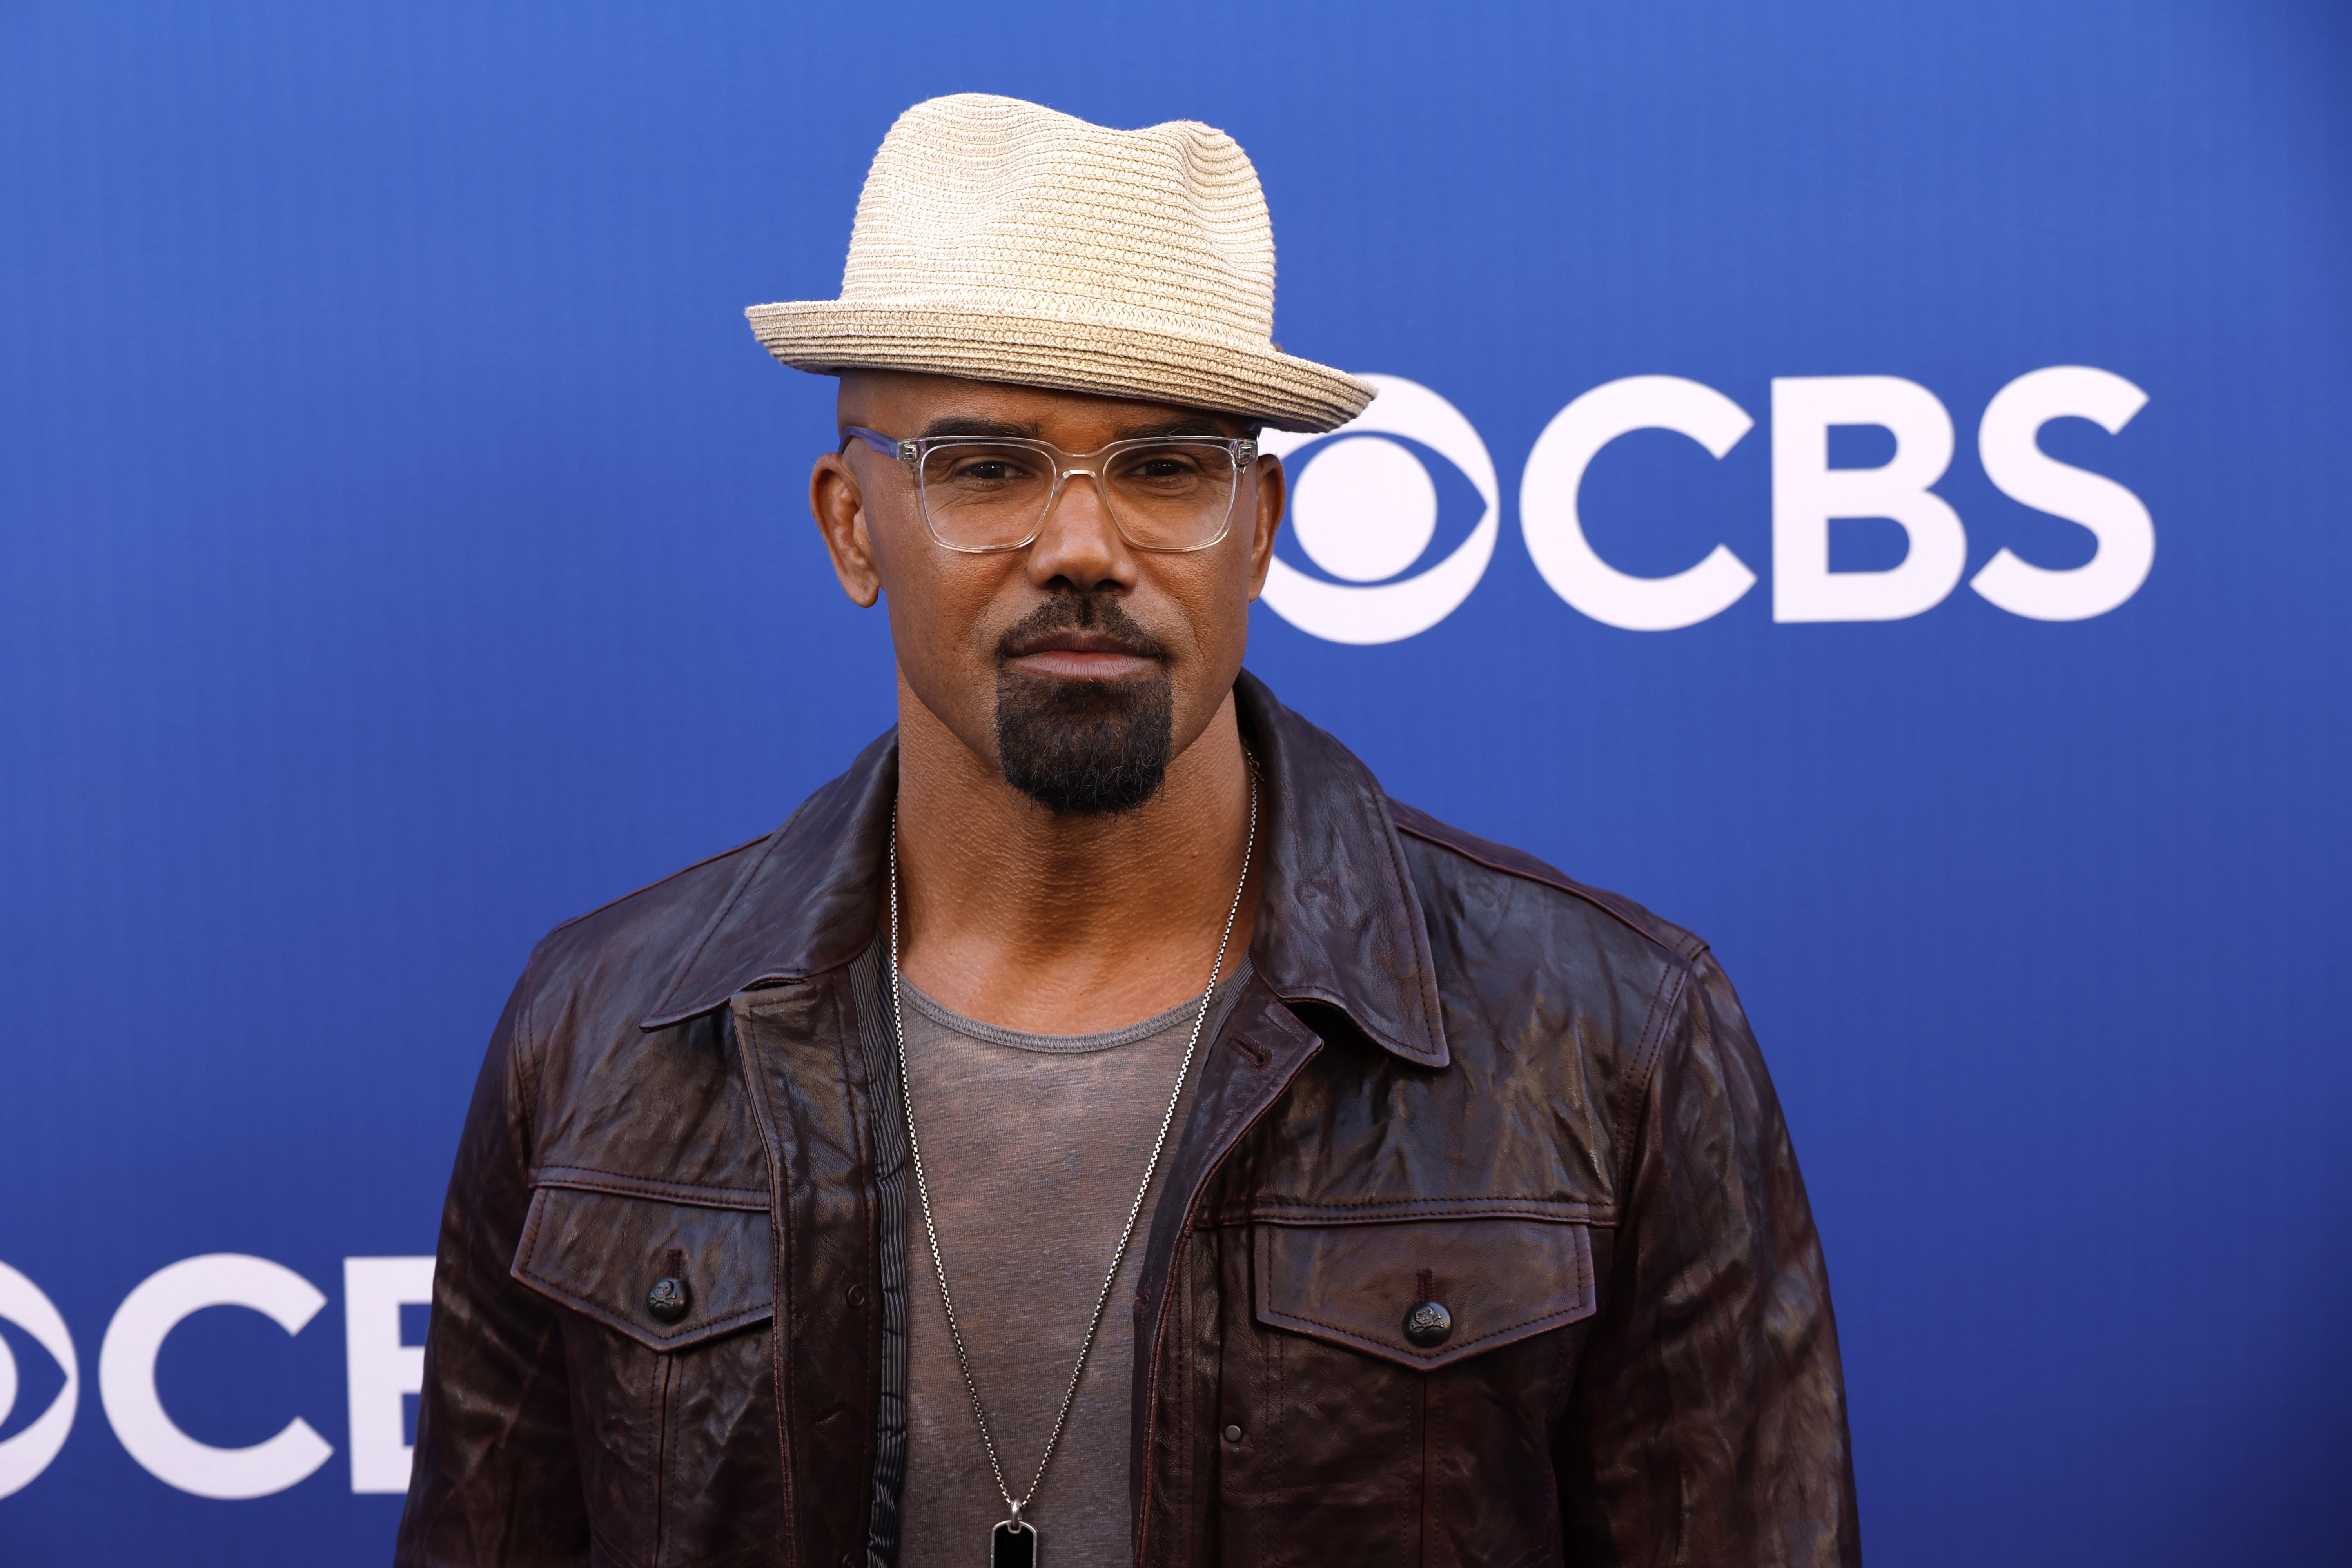 Shemar Moore attends the CBS Fall Schedule Celebration at Paramount Studios